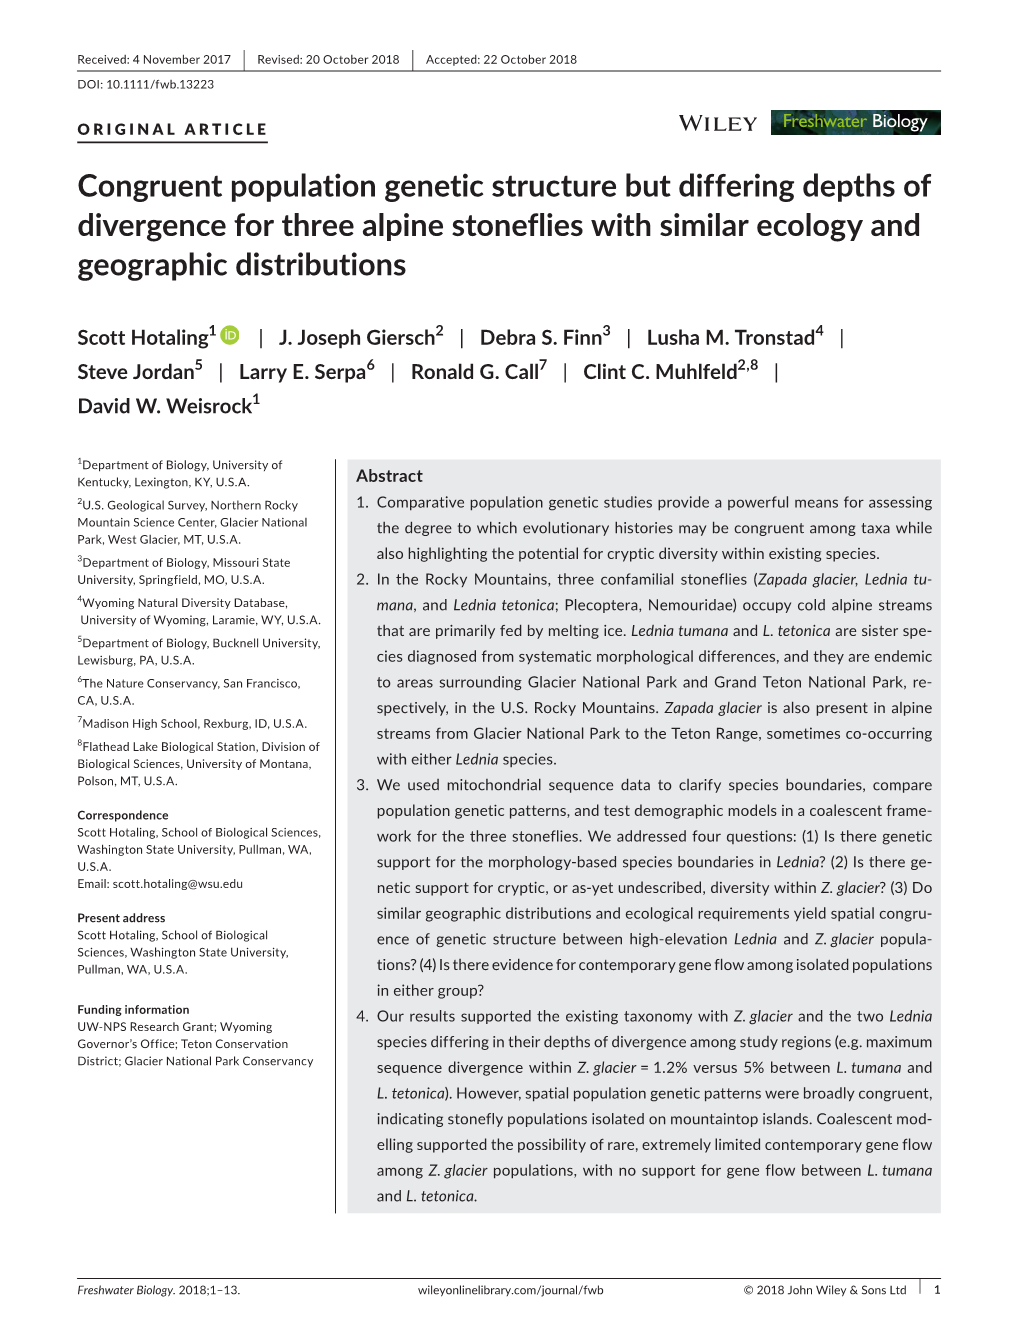 Congruent Population Genetic Structure but Differing Depths of Divergence for Three Alpine Stoneflies with Similar Ecology and Geographic Distributions